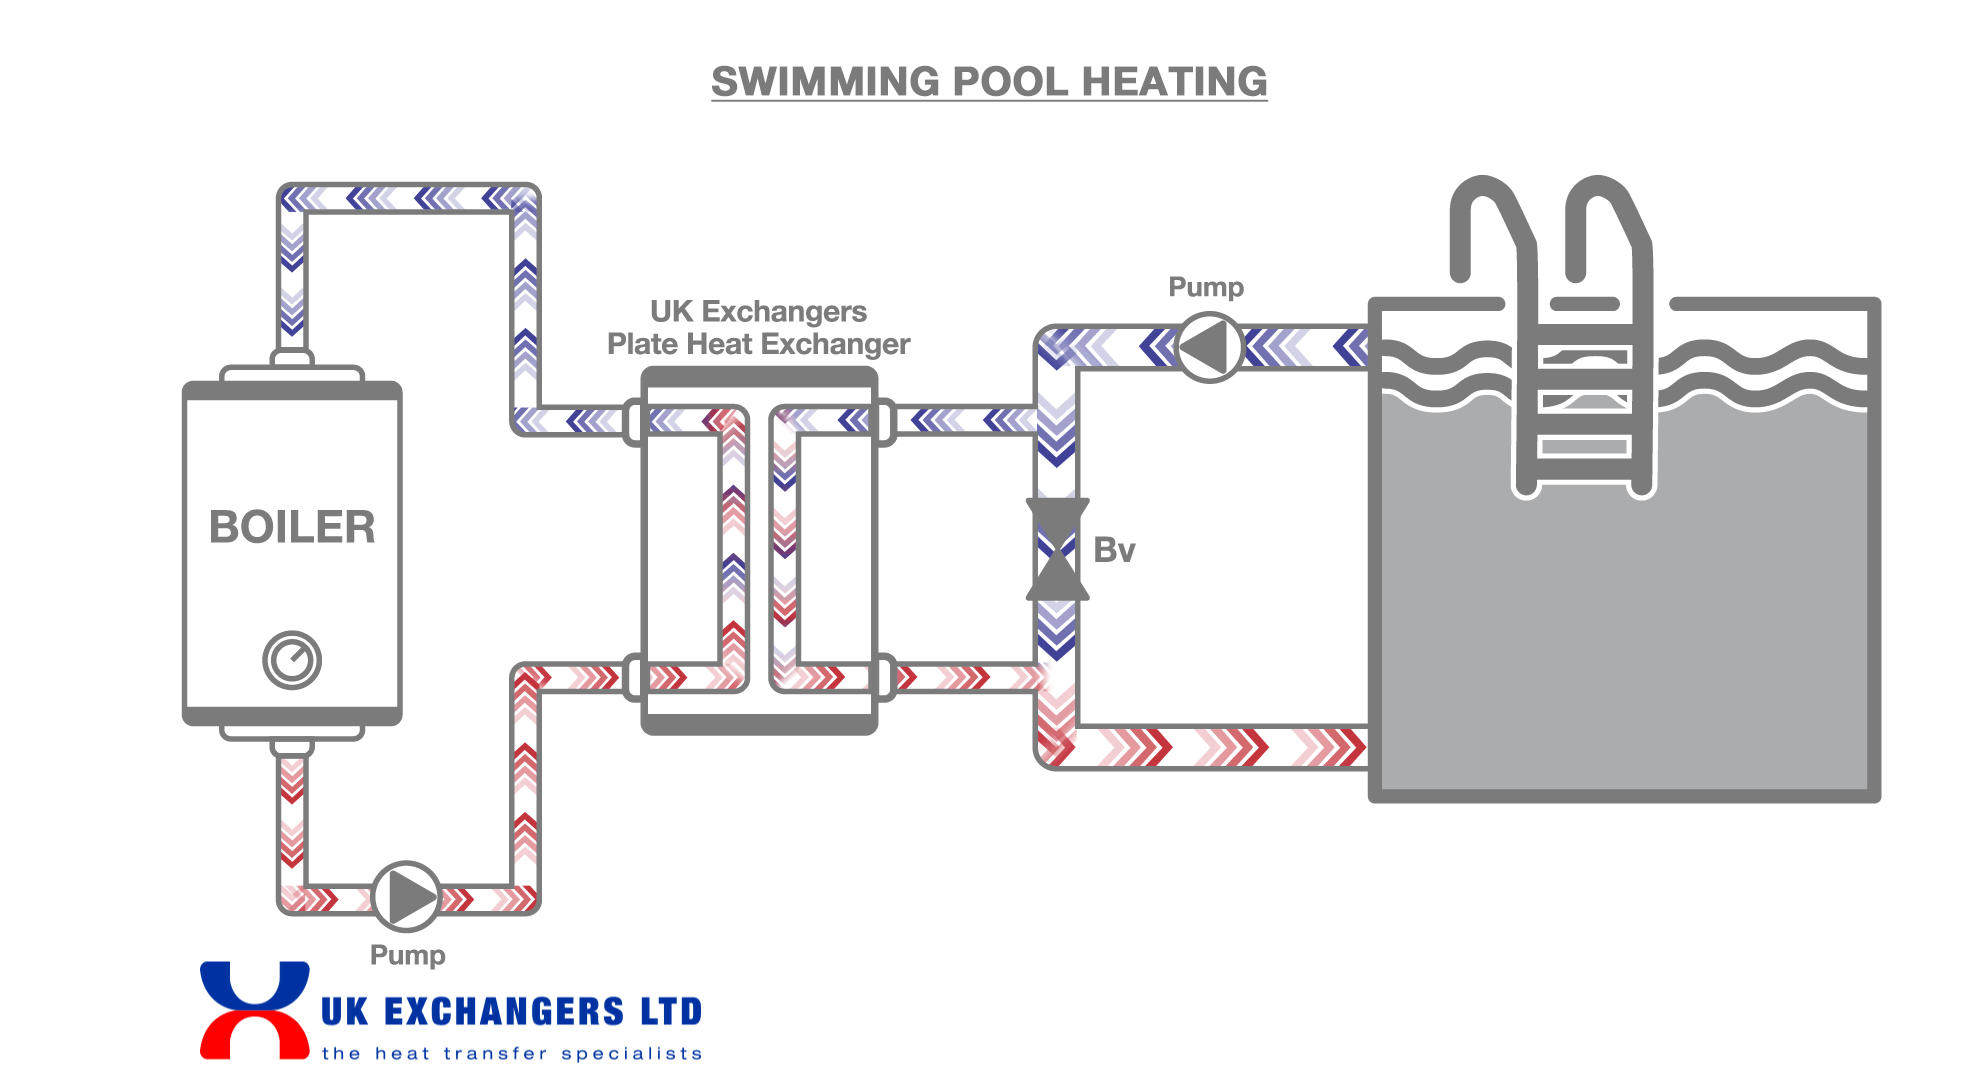 Heat Exchangers for Swimming Pool Heating